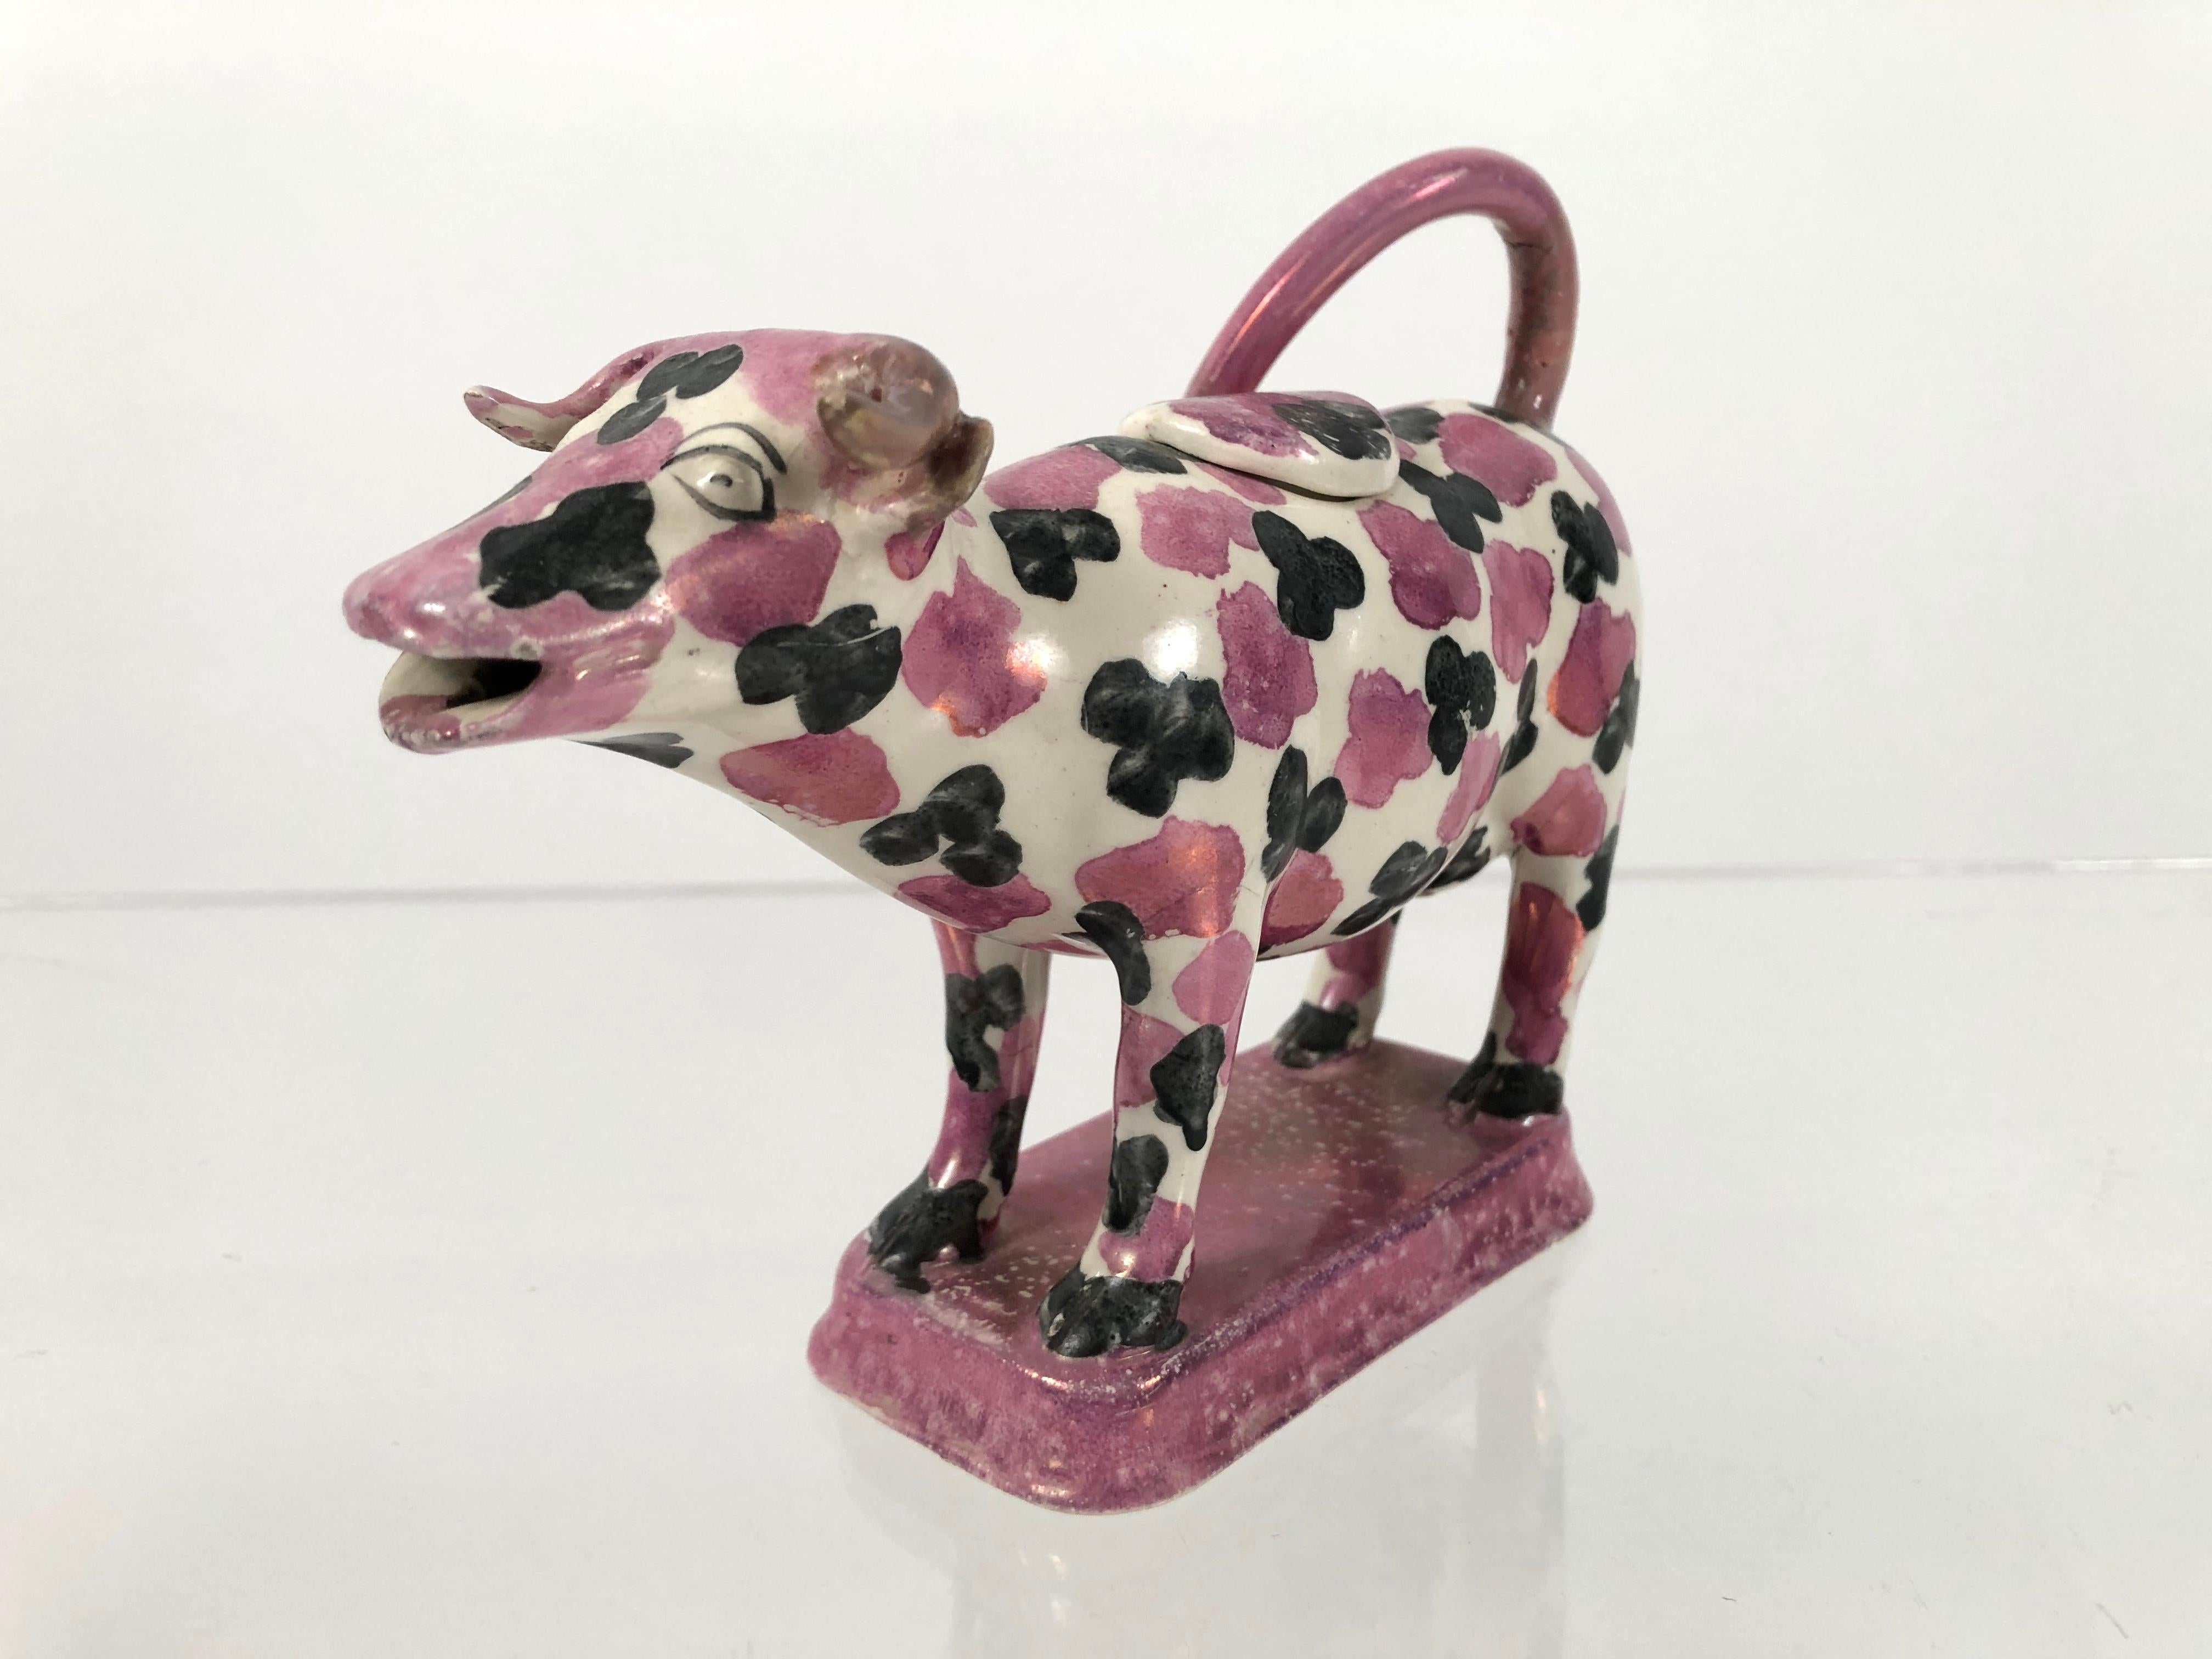 A Staffordshire pottery pink lustreware cow creamer and cover, with wonderful black and pink spotted decoration overall. The cow has an endearing happy expression and is standing on a rectangular pink lustre glazed plinth, English, circa 1820.